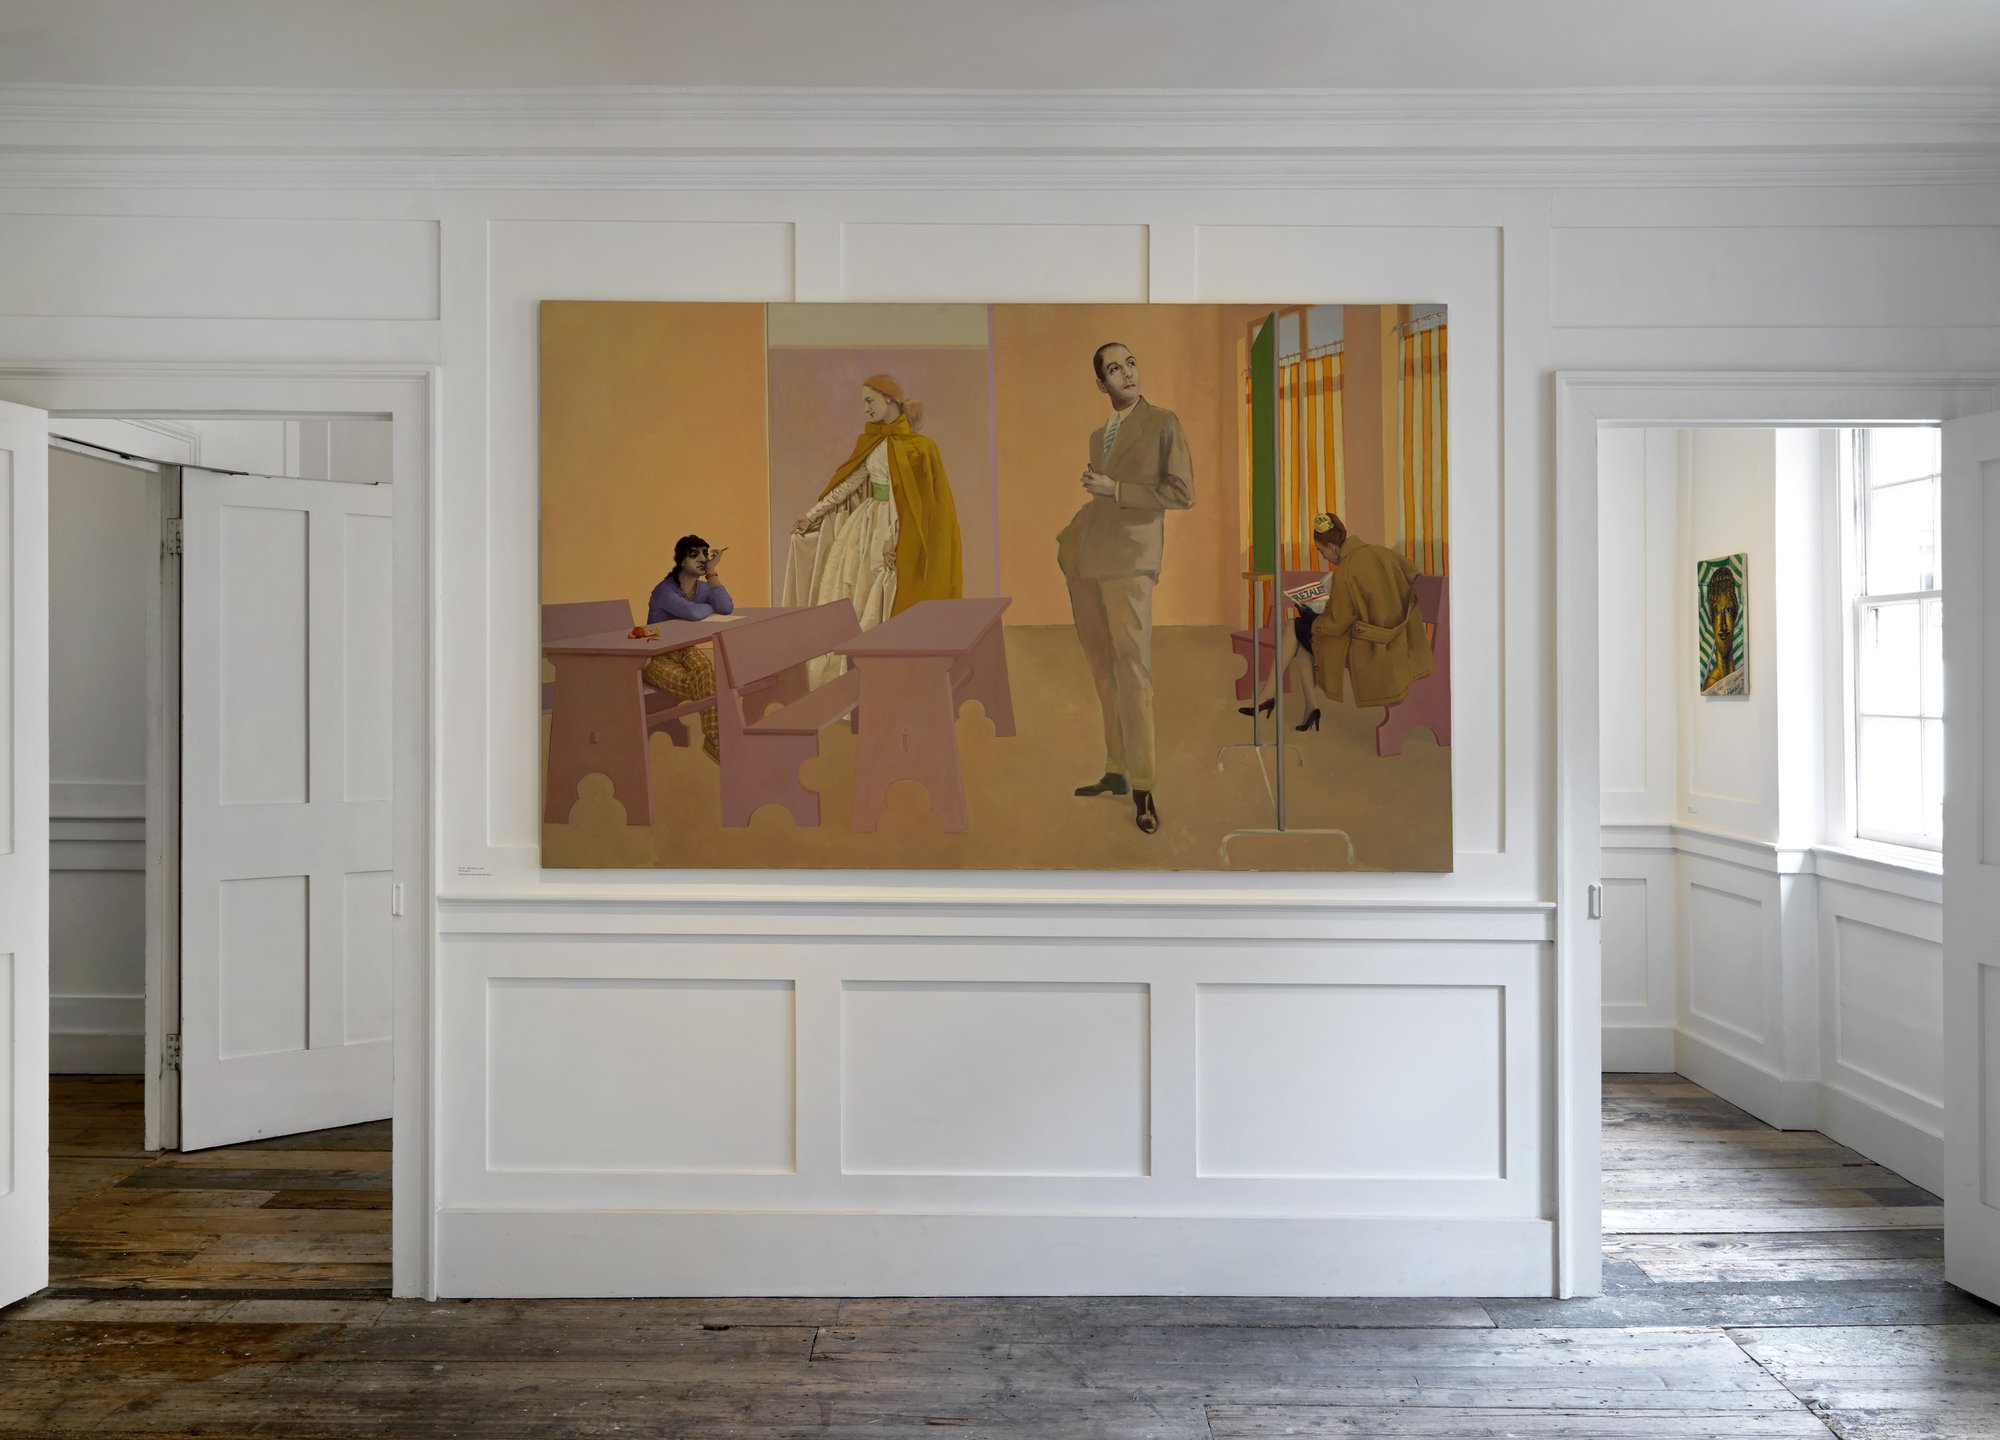 Lukas Duwenhögger, Rezalet (Impertinence), oil on canvas, 150 x 215 cm, 1998. Installation view, You Might Become a Park, Raven Row, 2016